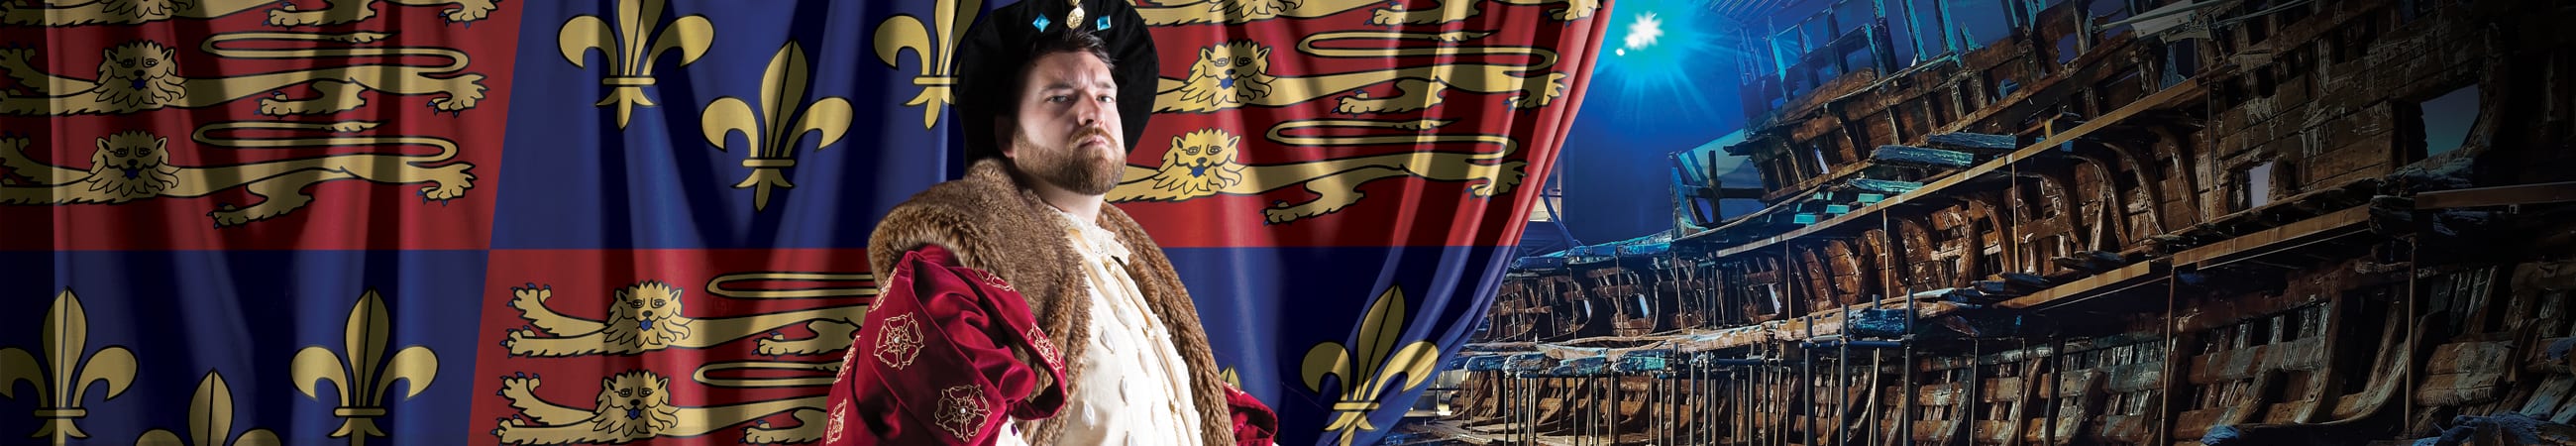 King Henry VIII in front of royal standard